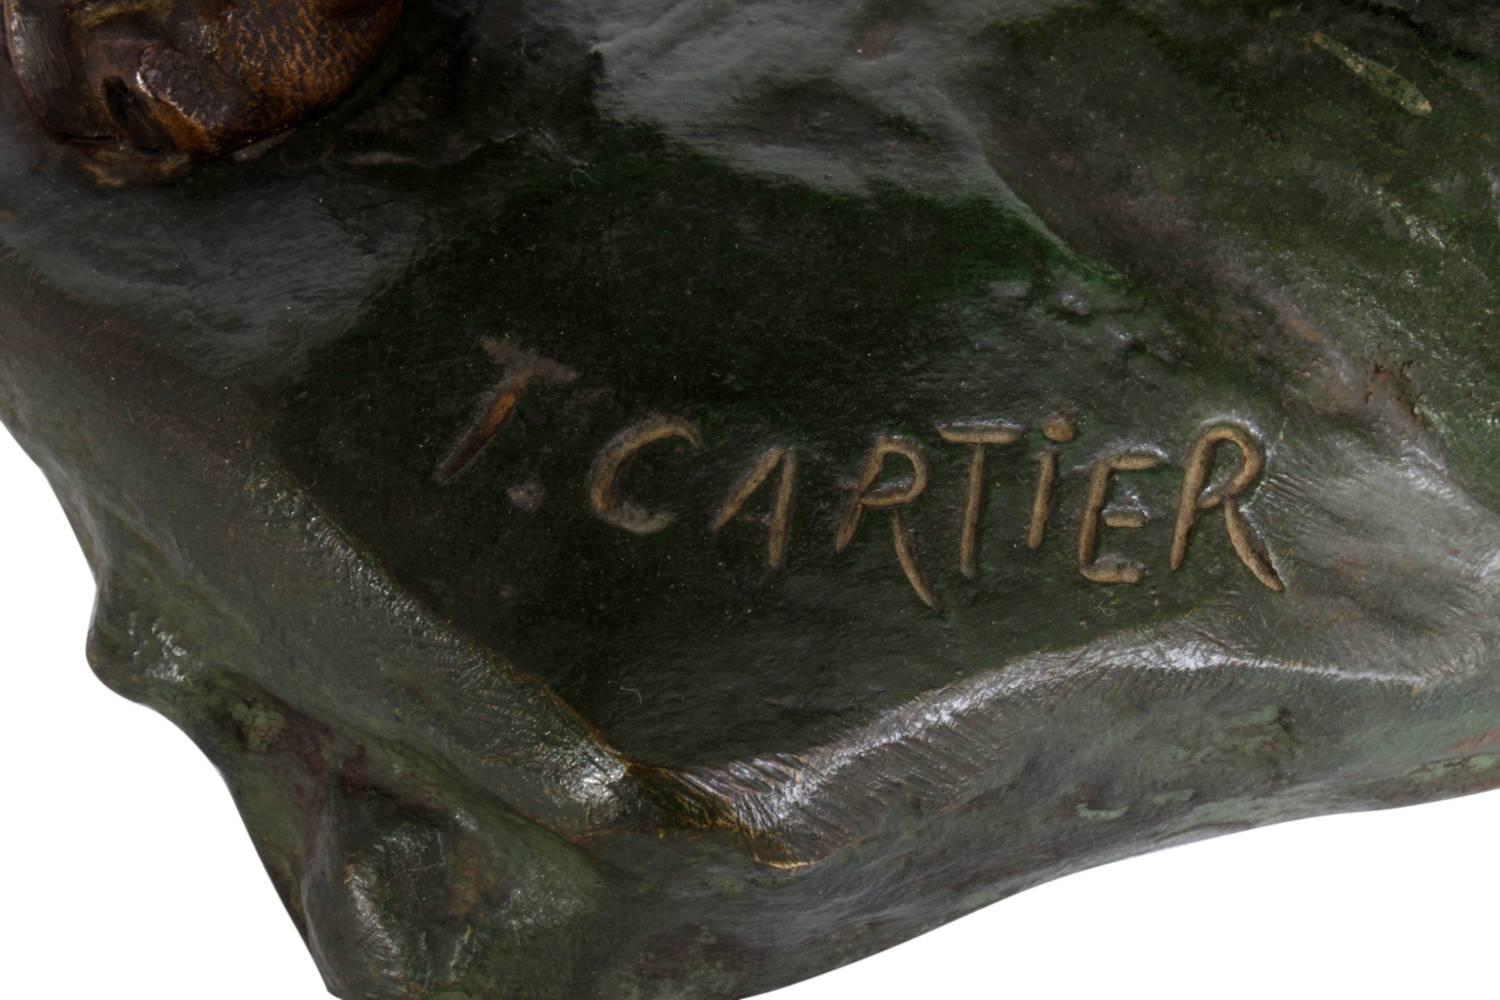 Bronze tiger circa 1920 by Thomas Cartier 
A bronze sculpture of a prowling tiger by Thomas Francois Cartier (French born 1879-1943) the sculpture is in very good condition with beautiful patina
Age: 1920
Style: Sculpture
Material: